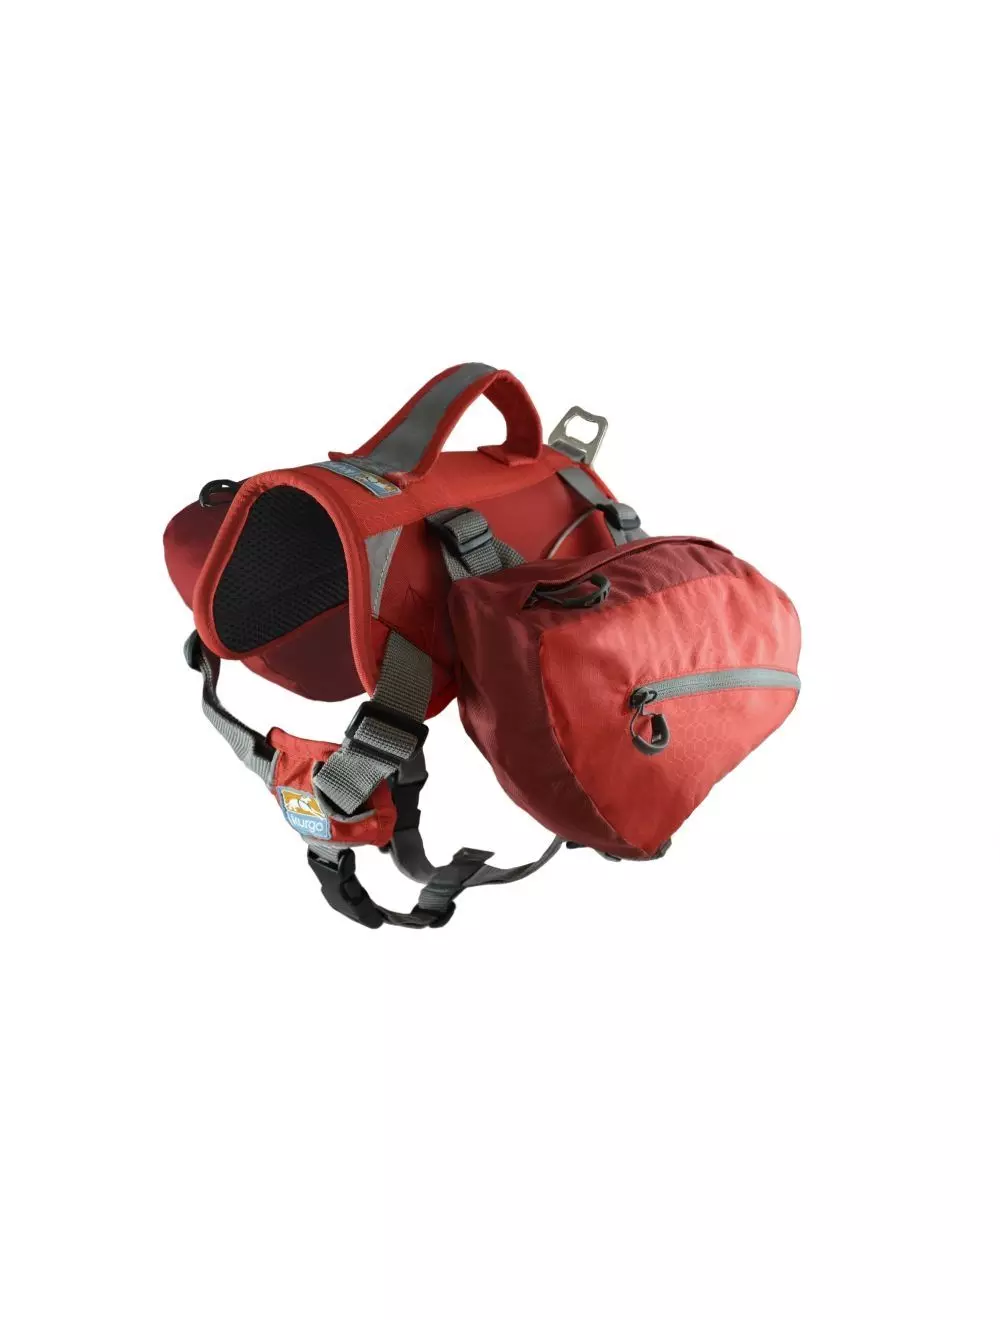 Kurgo Baxter, Backpack In Red 81314601585